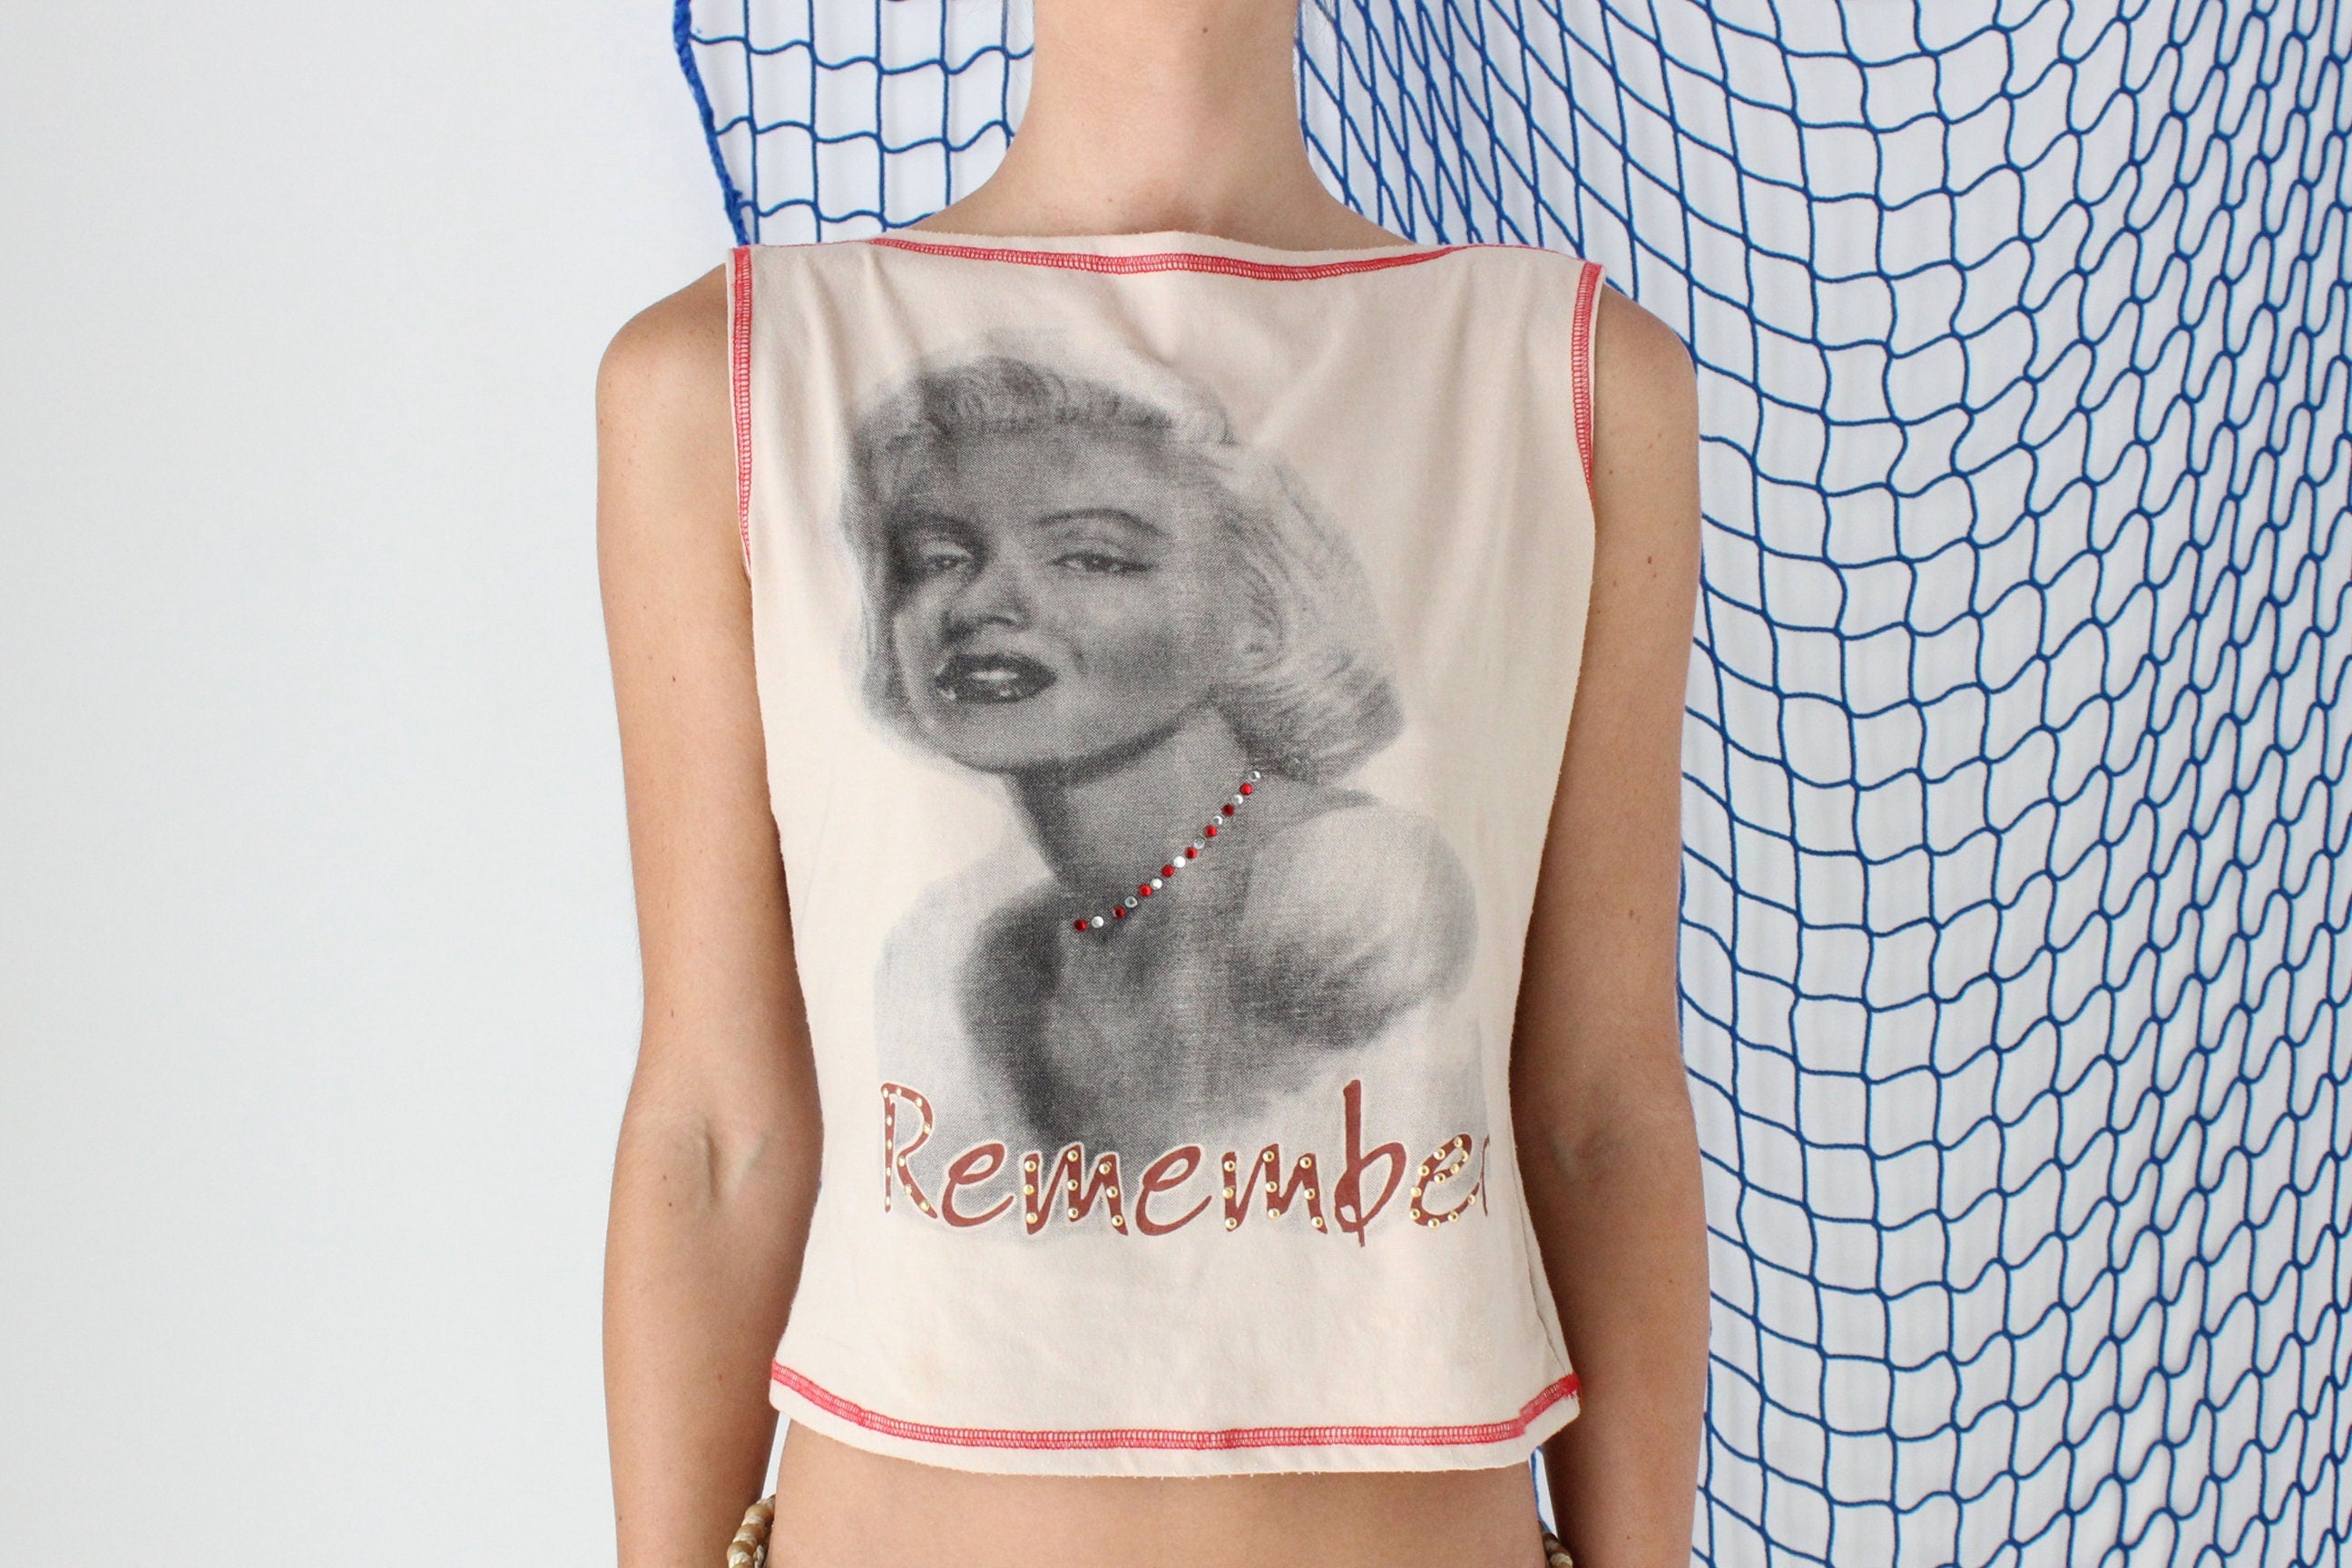 FOUND IN GREECE Y2K "Remember" Marylin Monroe Tank Top